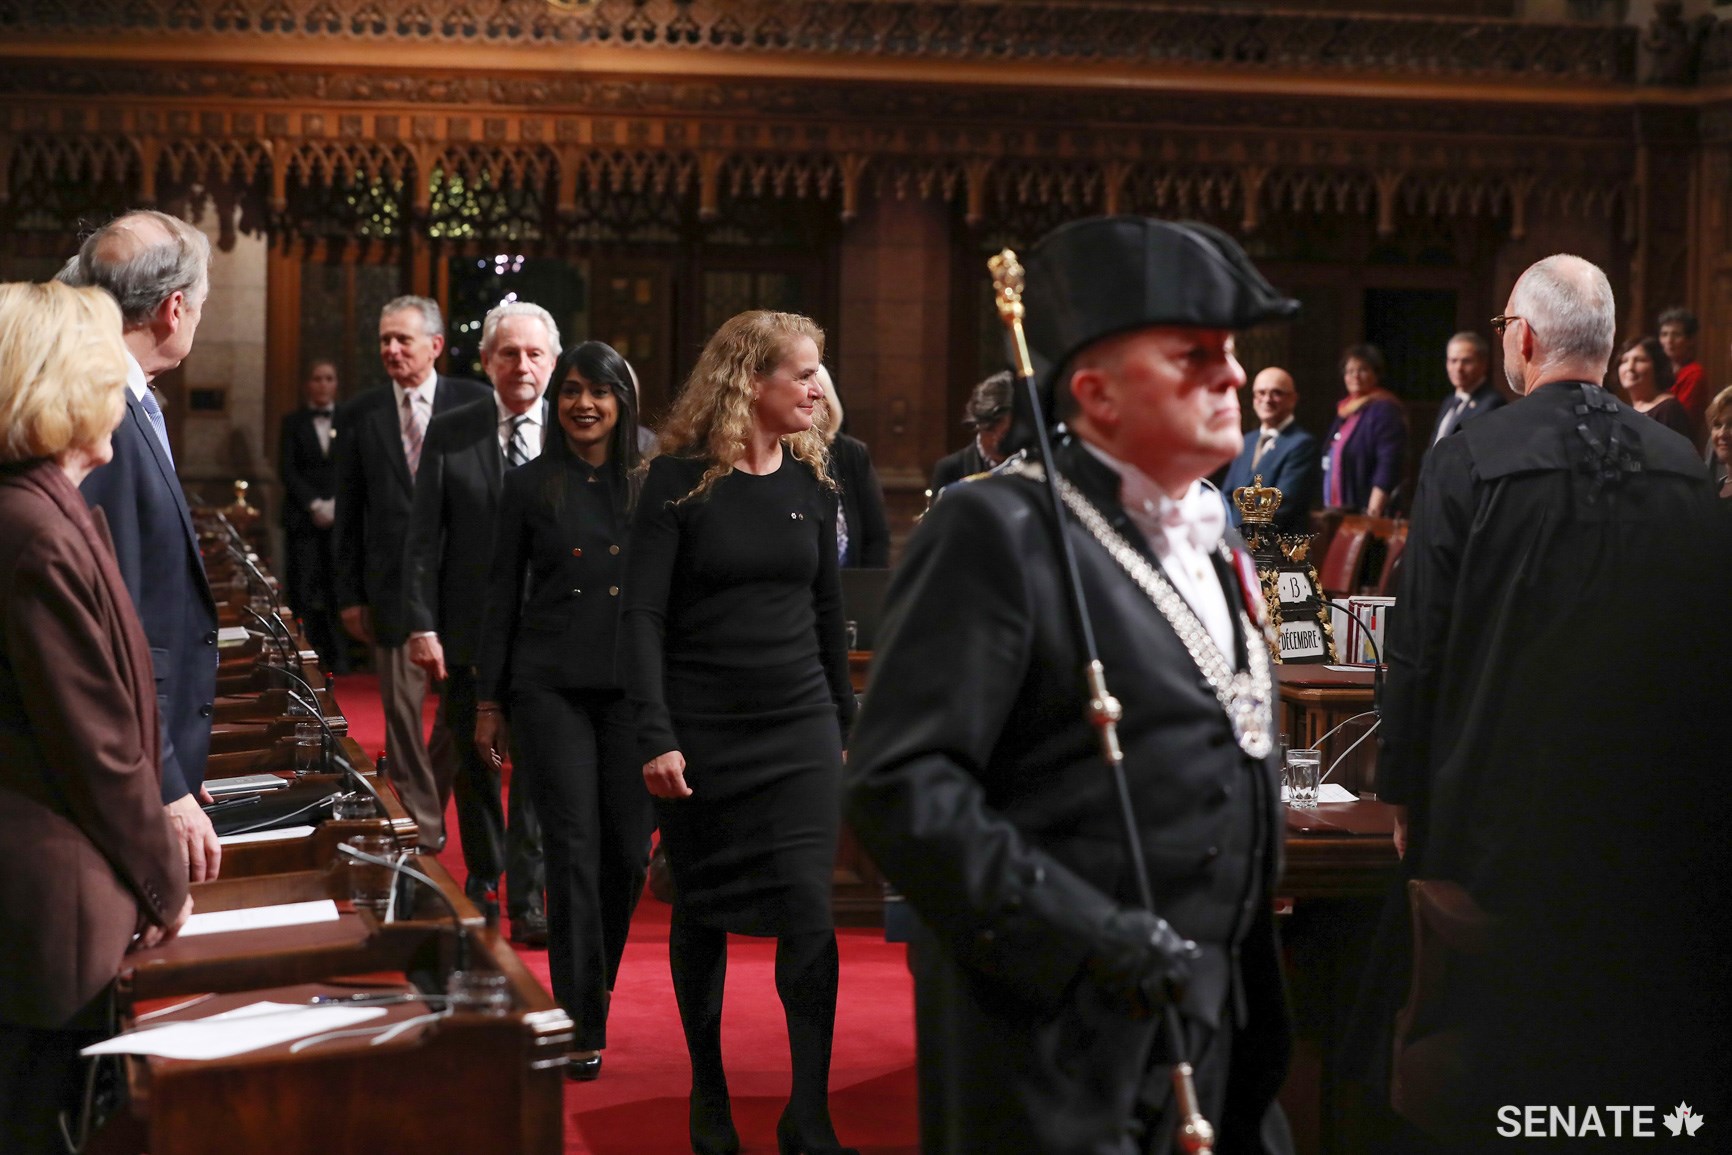 Governor General Julie Payette is escorted into the Senate Chamber by the Usher of the Black Rod to grant Royal Assent to six bills. Behind her are Leader of the Government in the House of Commons Bardish Chagger, Government Representative in the Senate Senator Peter Harder and Leader of the Opposition Senator Larry Smith.